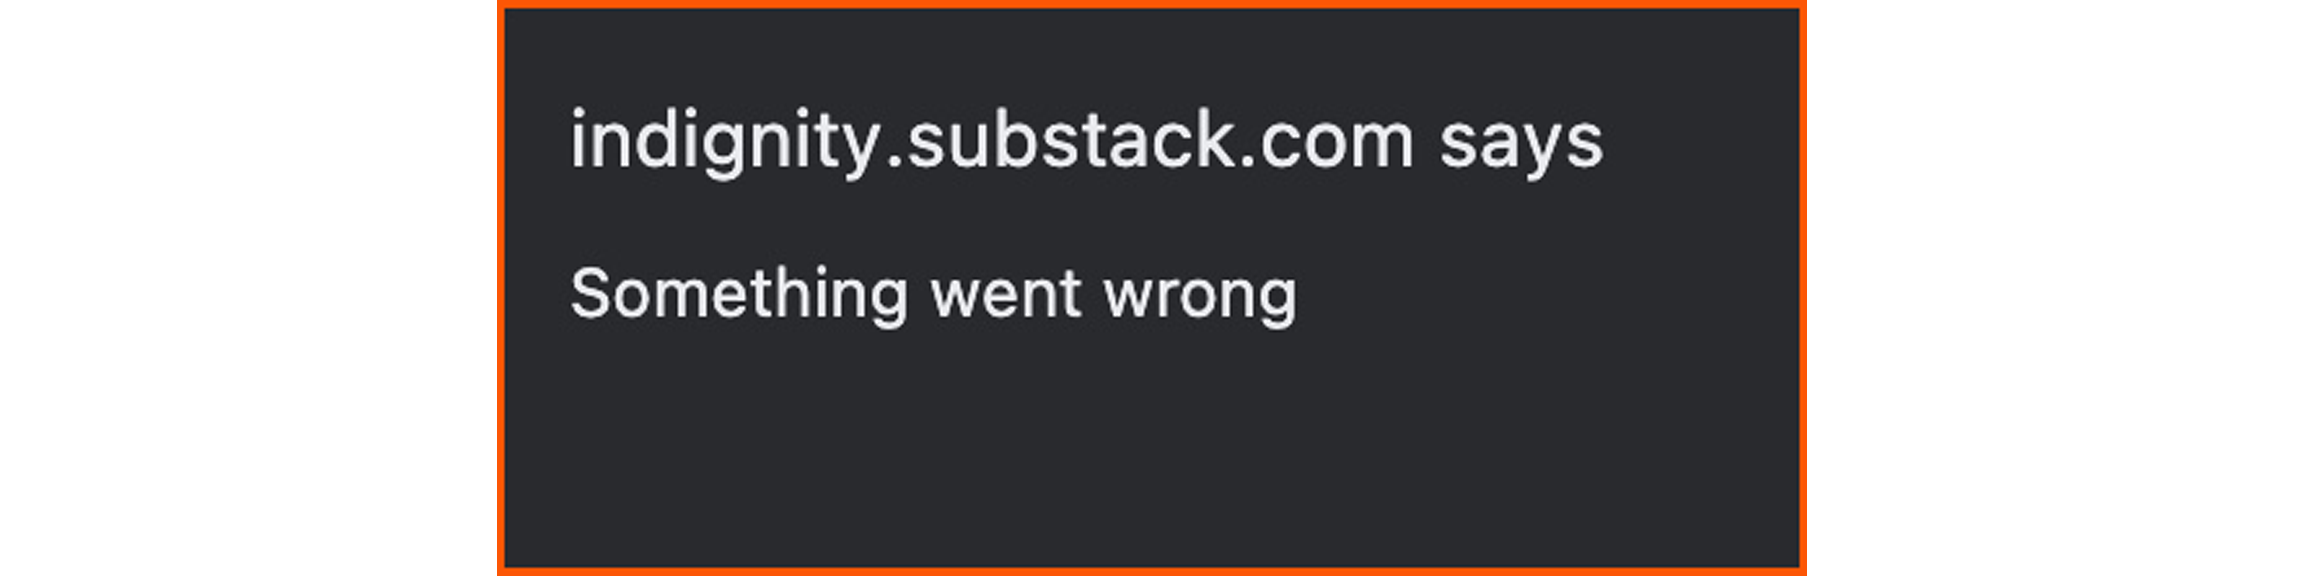 ALT/CAPTION: An error message generated in the Substack platform. “indignity.substack.com says Something went wrong”